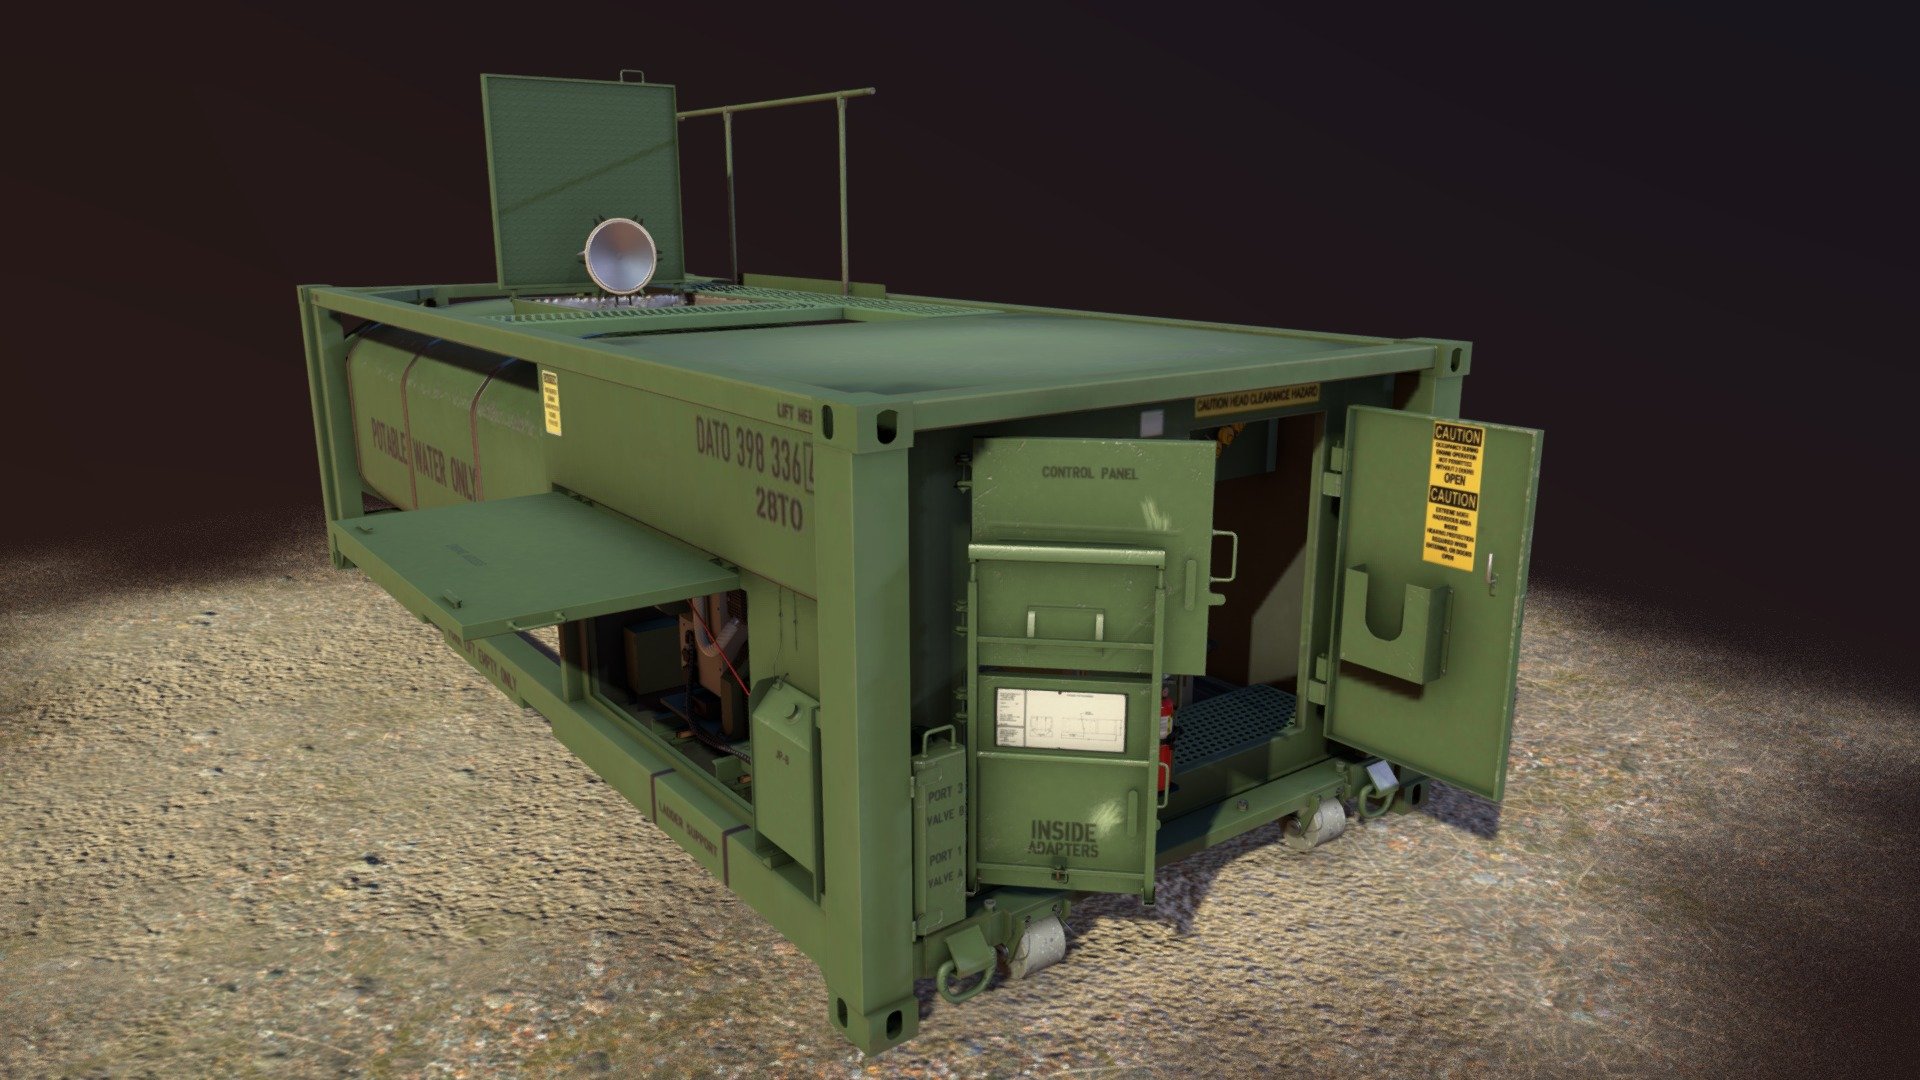 A potable water tank currently in use by the military out in the field.  This 3d model was created for a real-time training application (Unity 3D).  Modeled in 3ds Max, textured in Substance Painter (with some help from Photoshop).  

For some reason, thius model displays at incredibly low res texturing by default, but if you want to see it in its full glory, switch it to &ldquo;HD